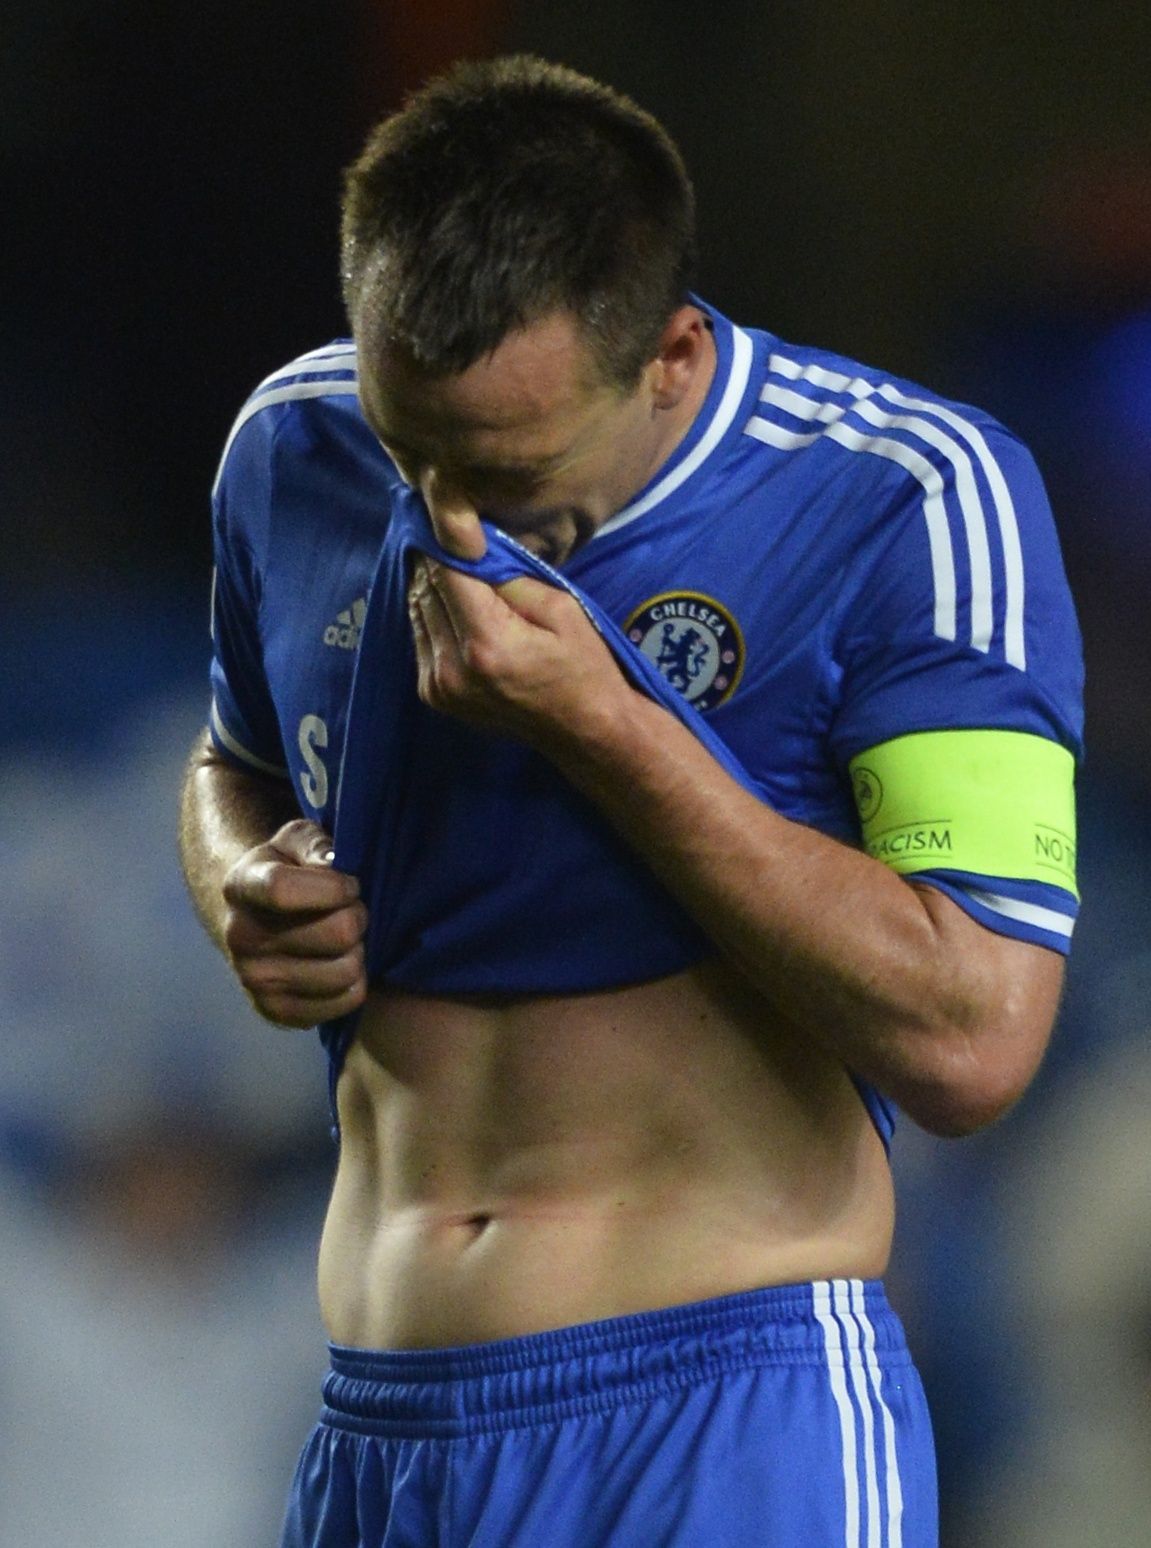 Chelsea's Terry leaves the pitch after the final whistle in Champion's League semi-final second leg soccer match against Atletico Madrid in London